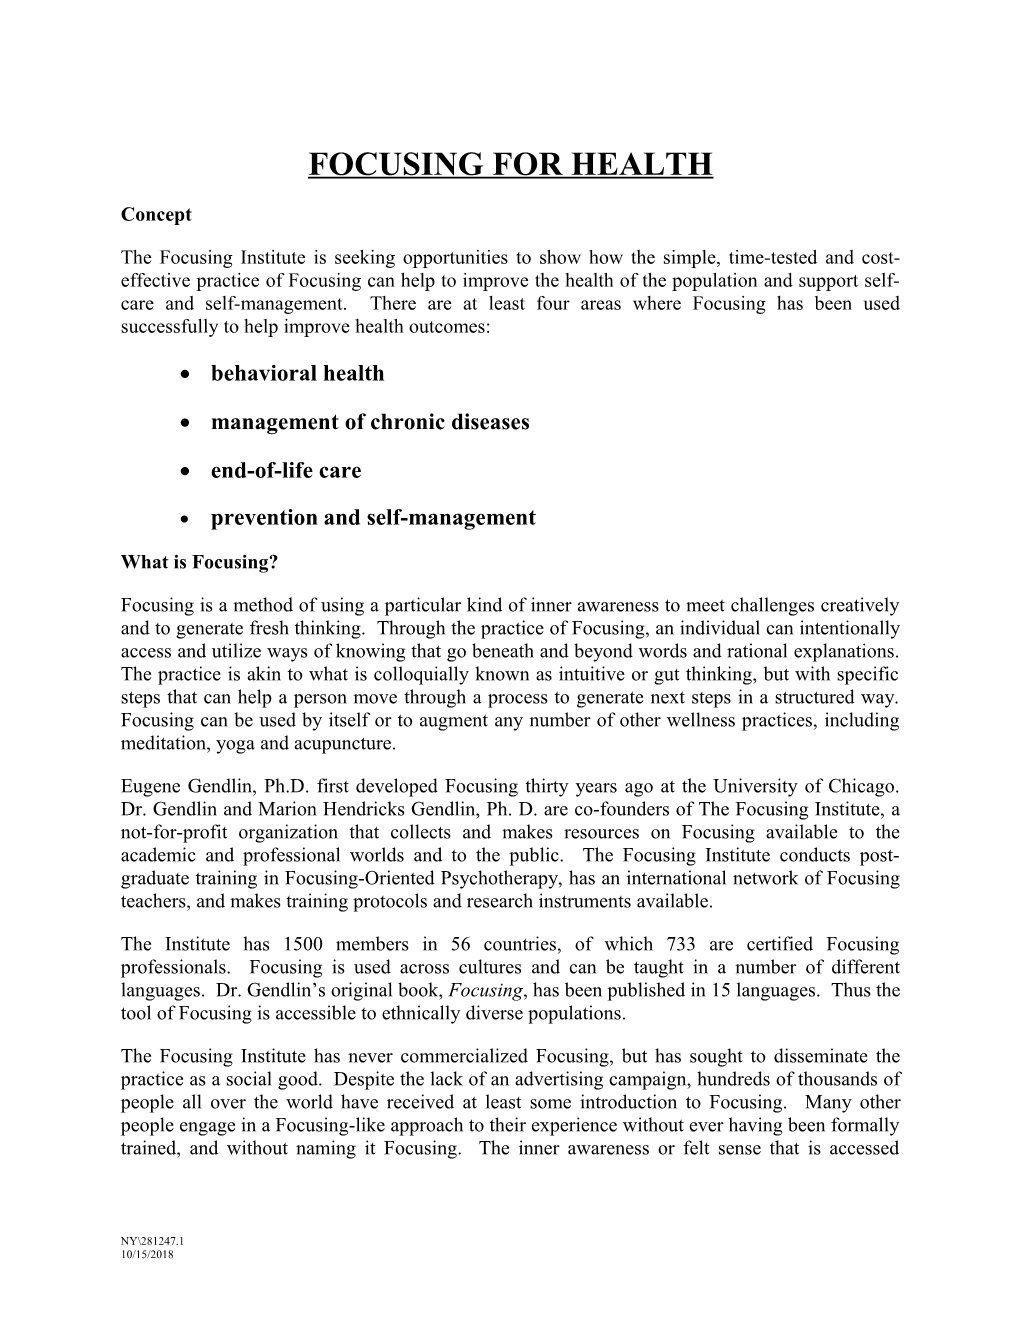 Focusing for Health